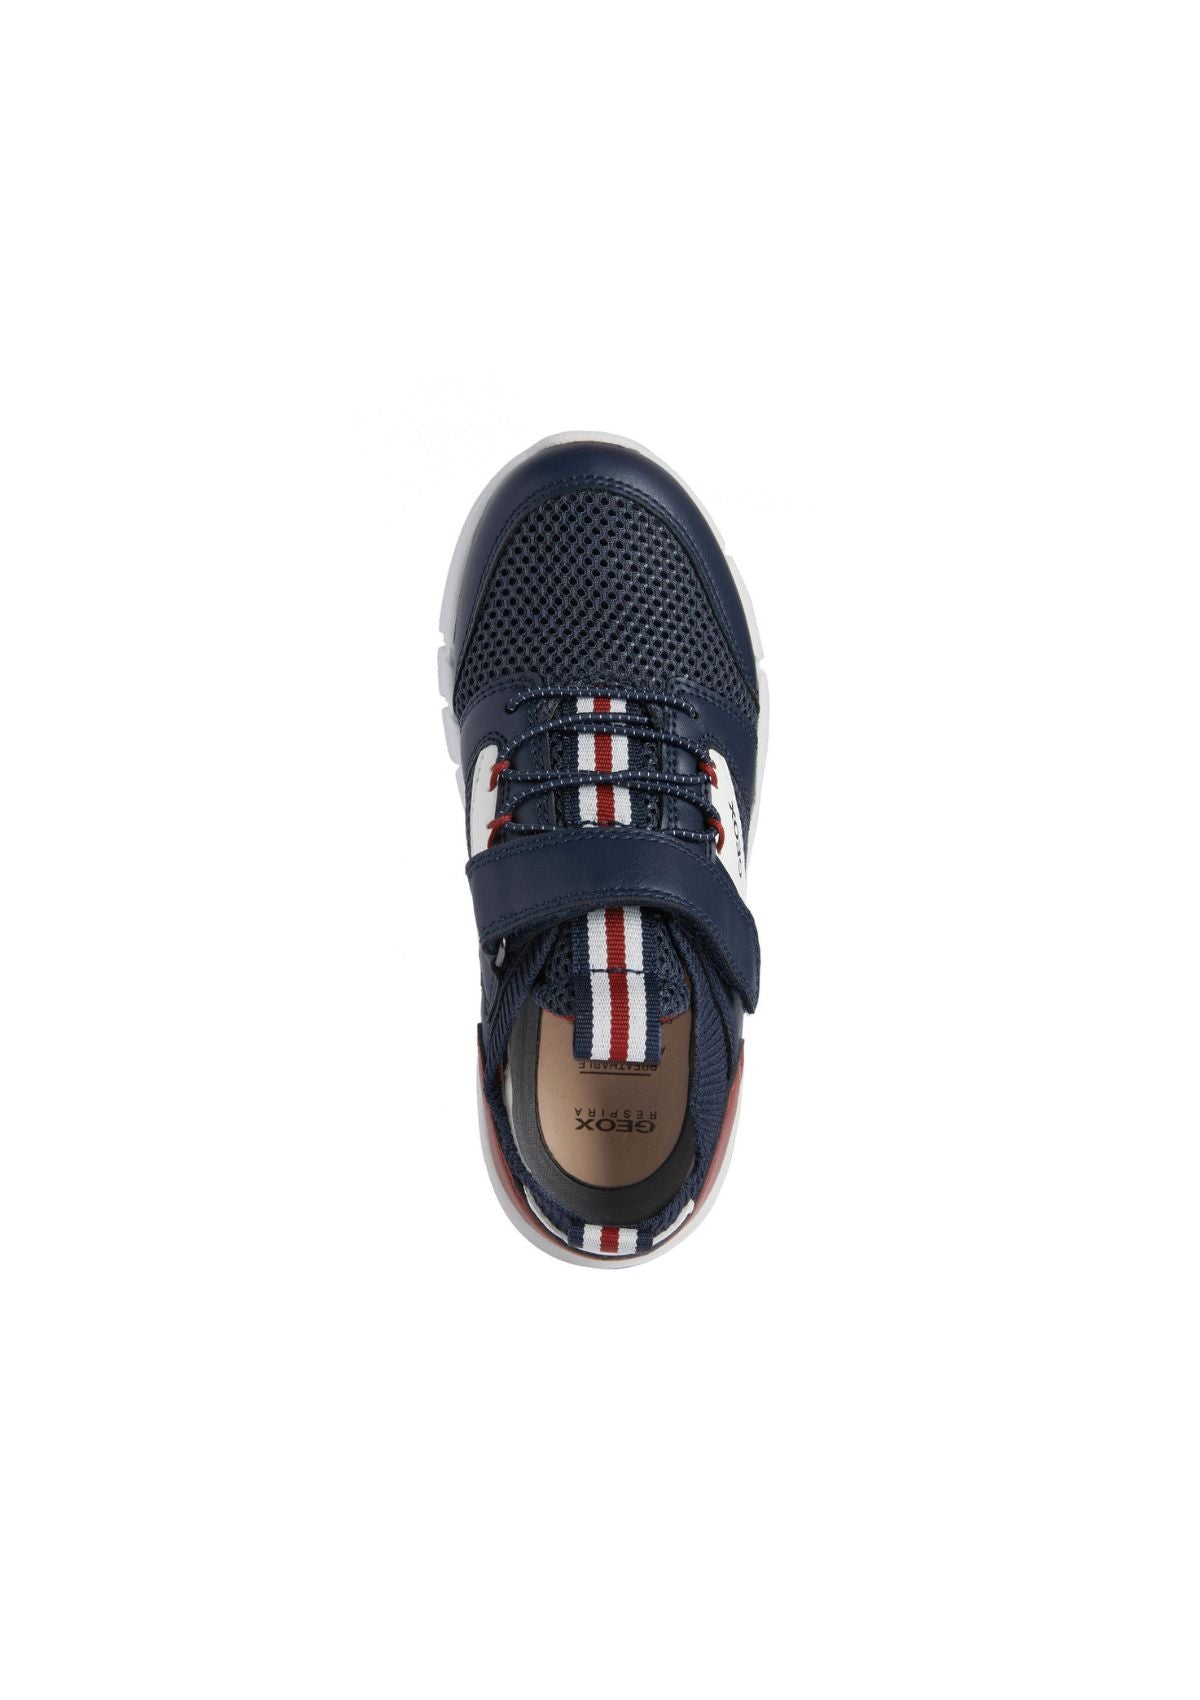 Geox Boys Trainers FLEXYPER Navy Red up